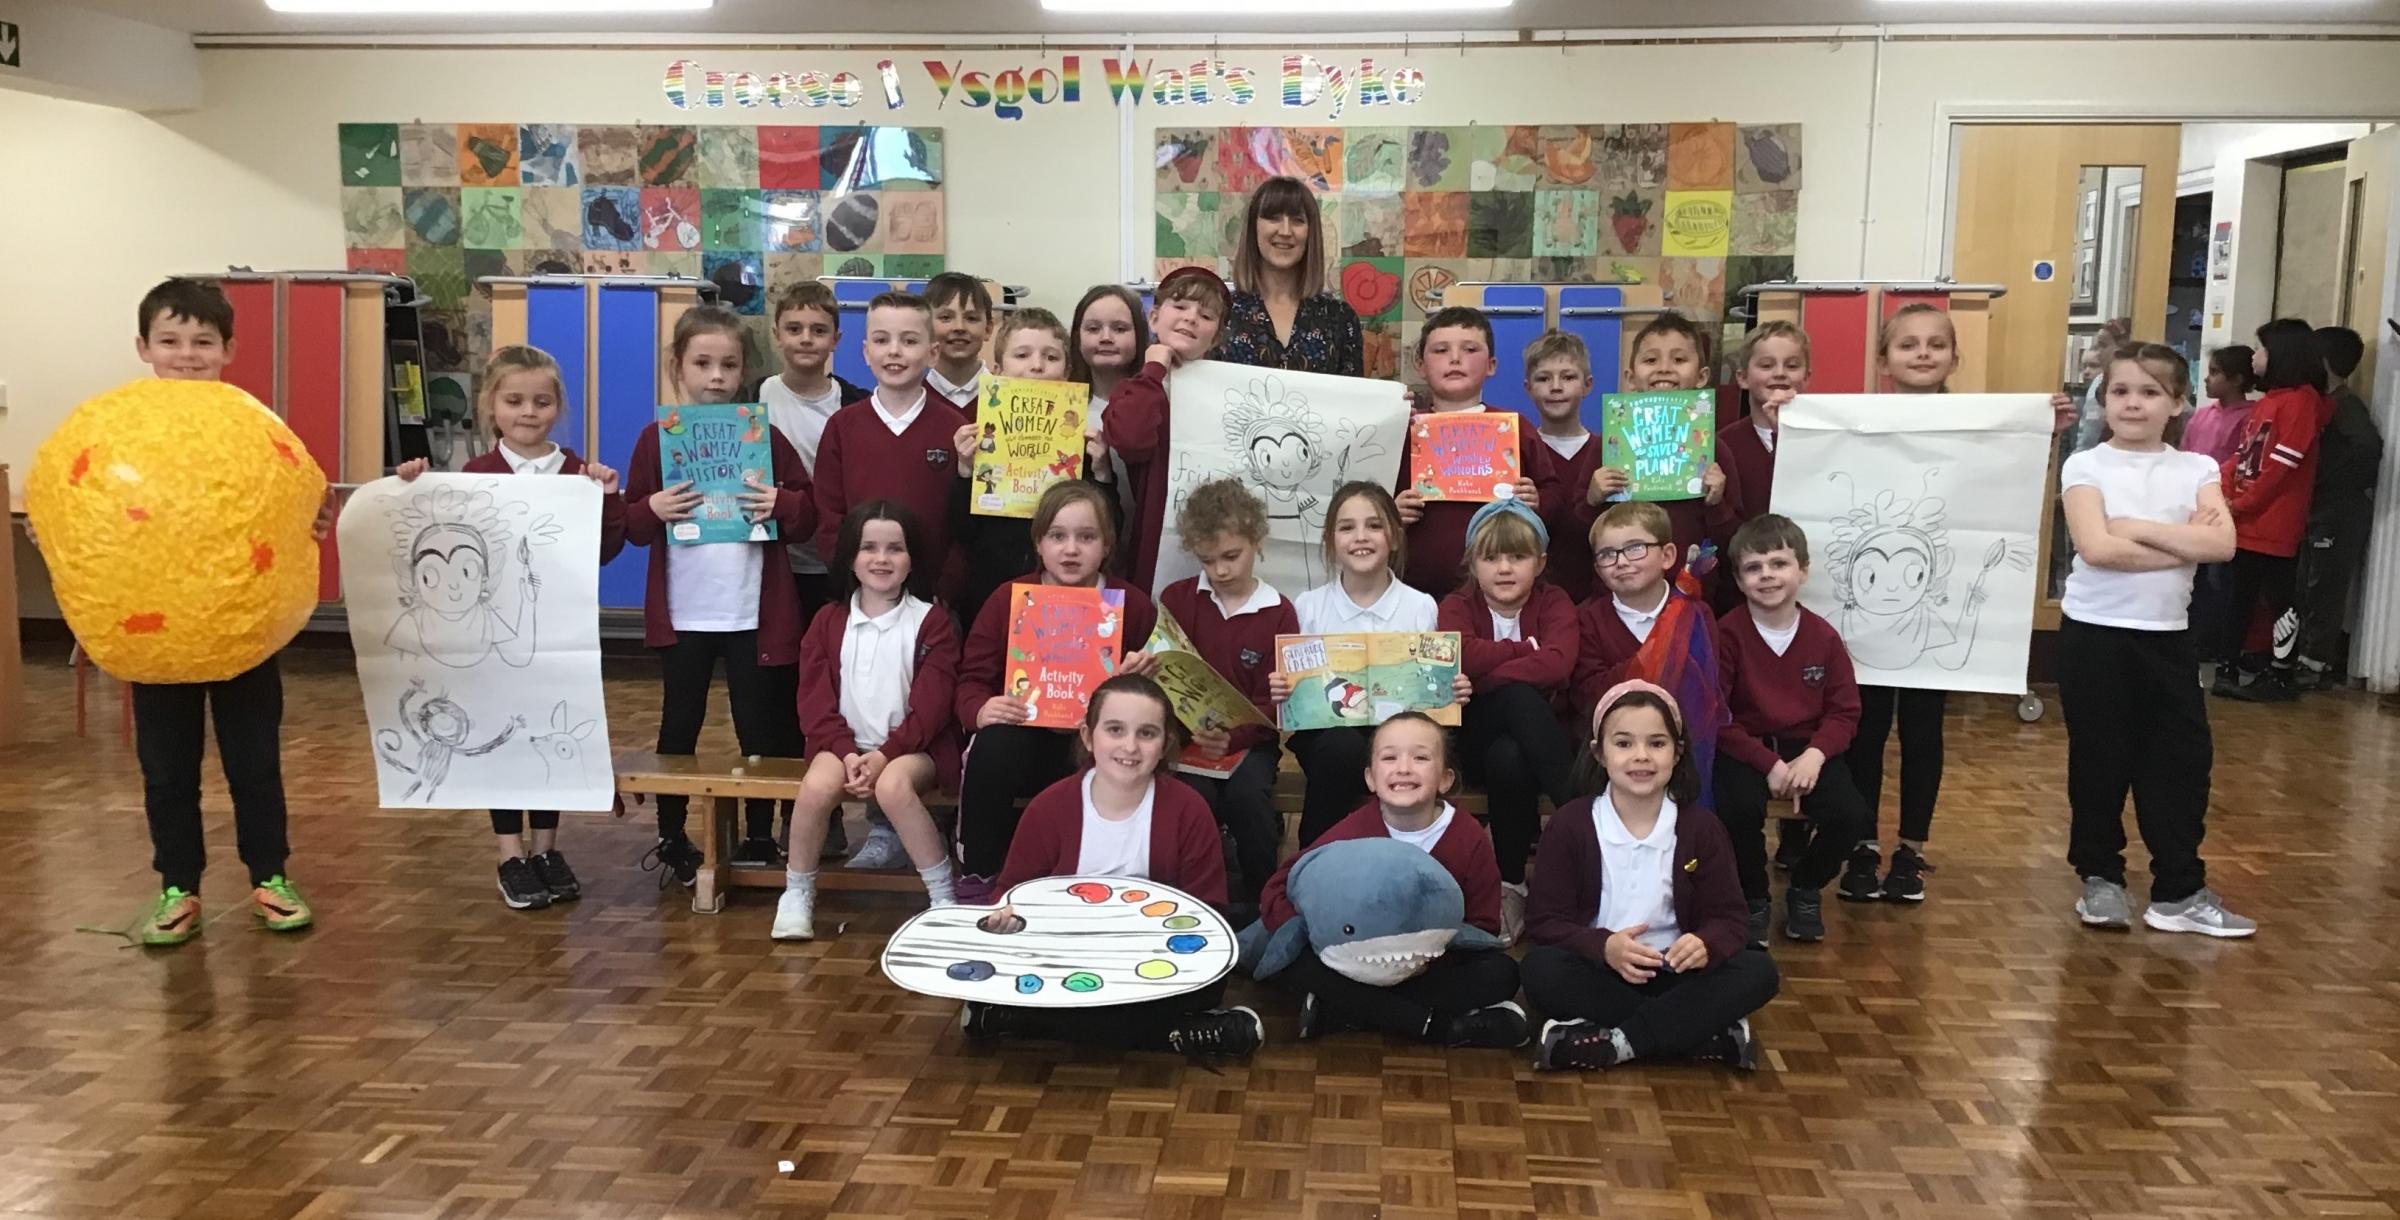 Author and illustrator Kate Pankhurst visited Wats Dyke Primary School.